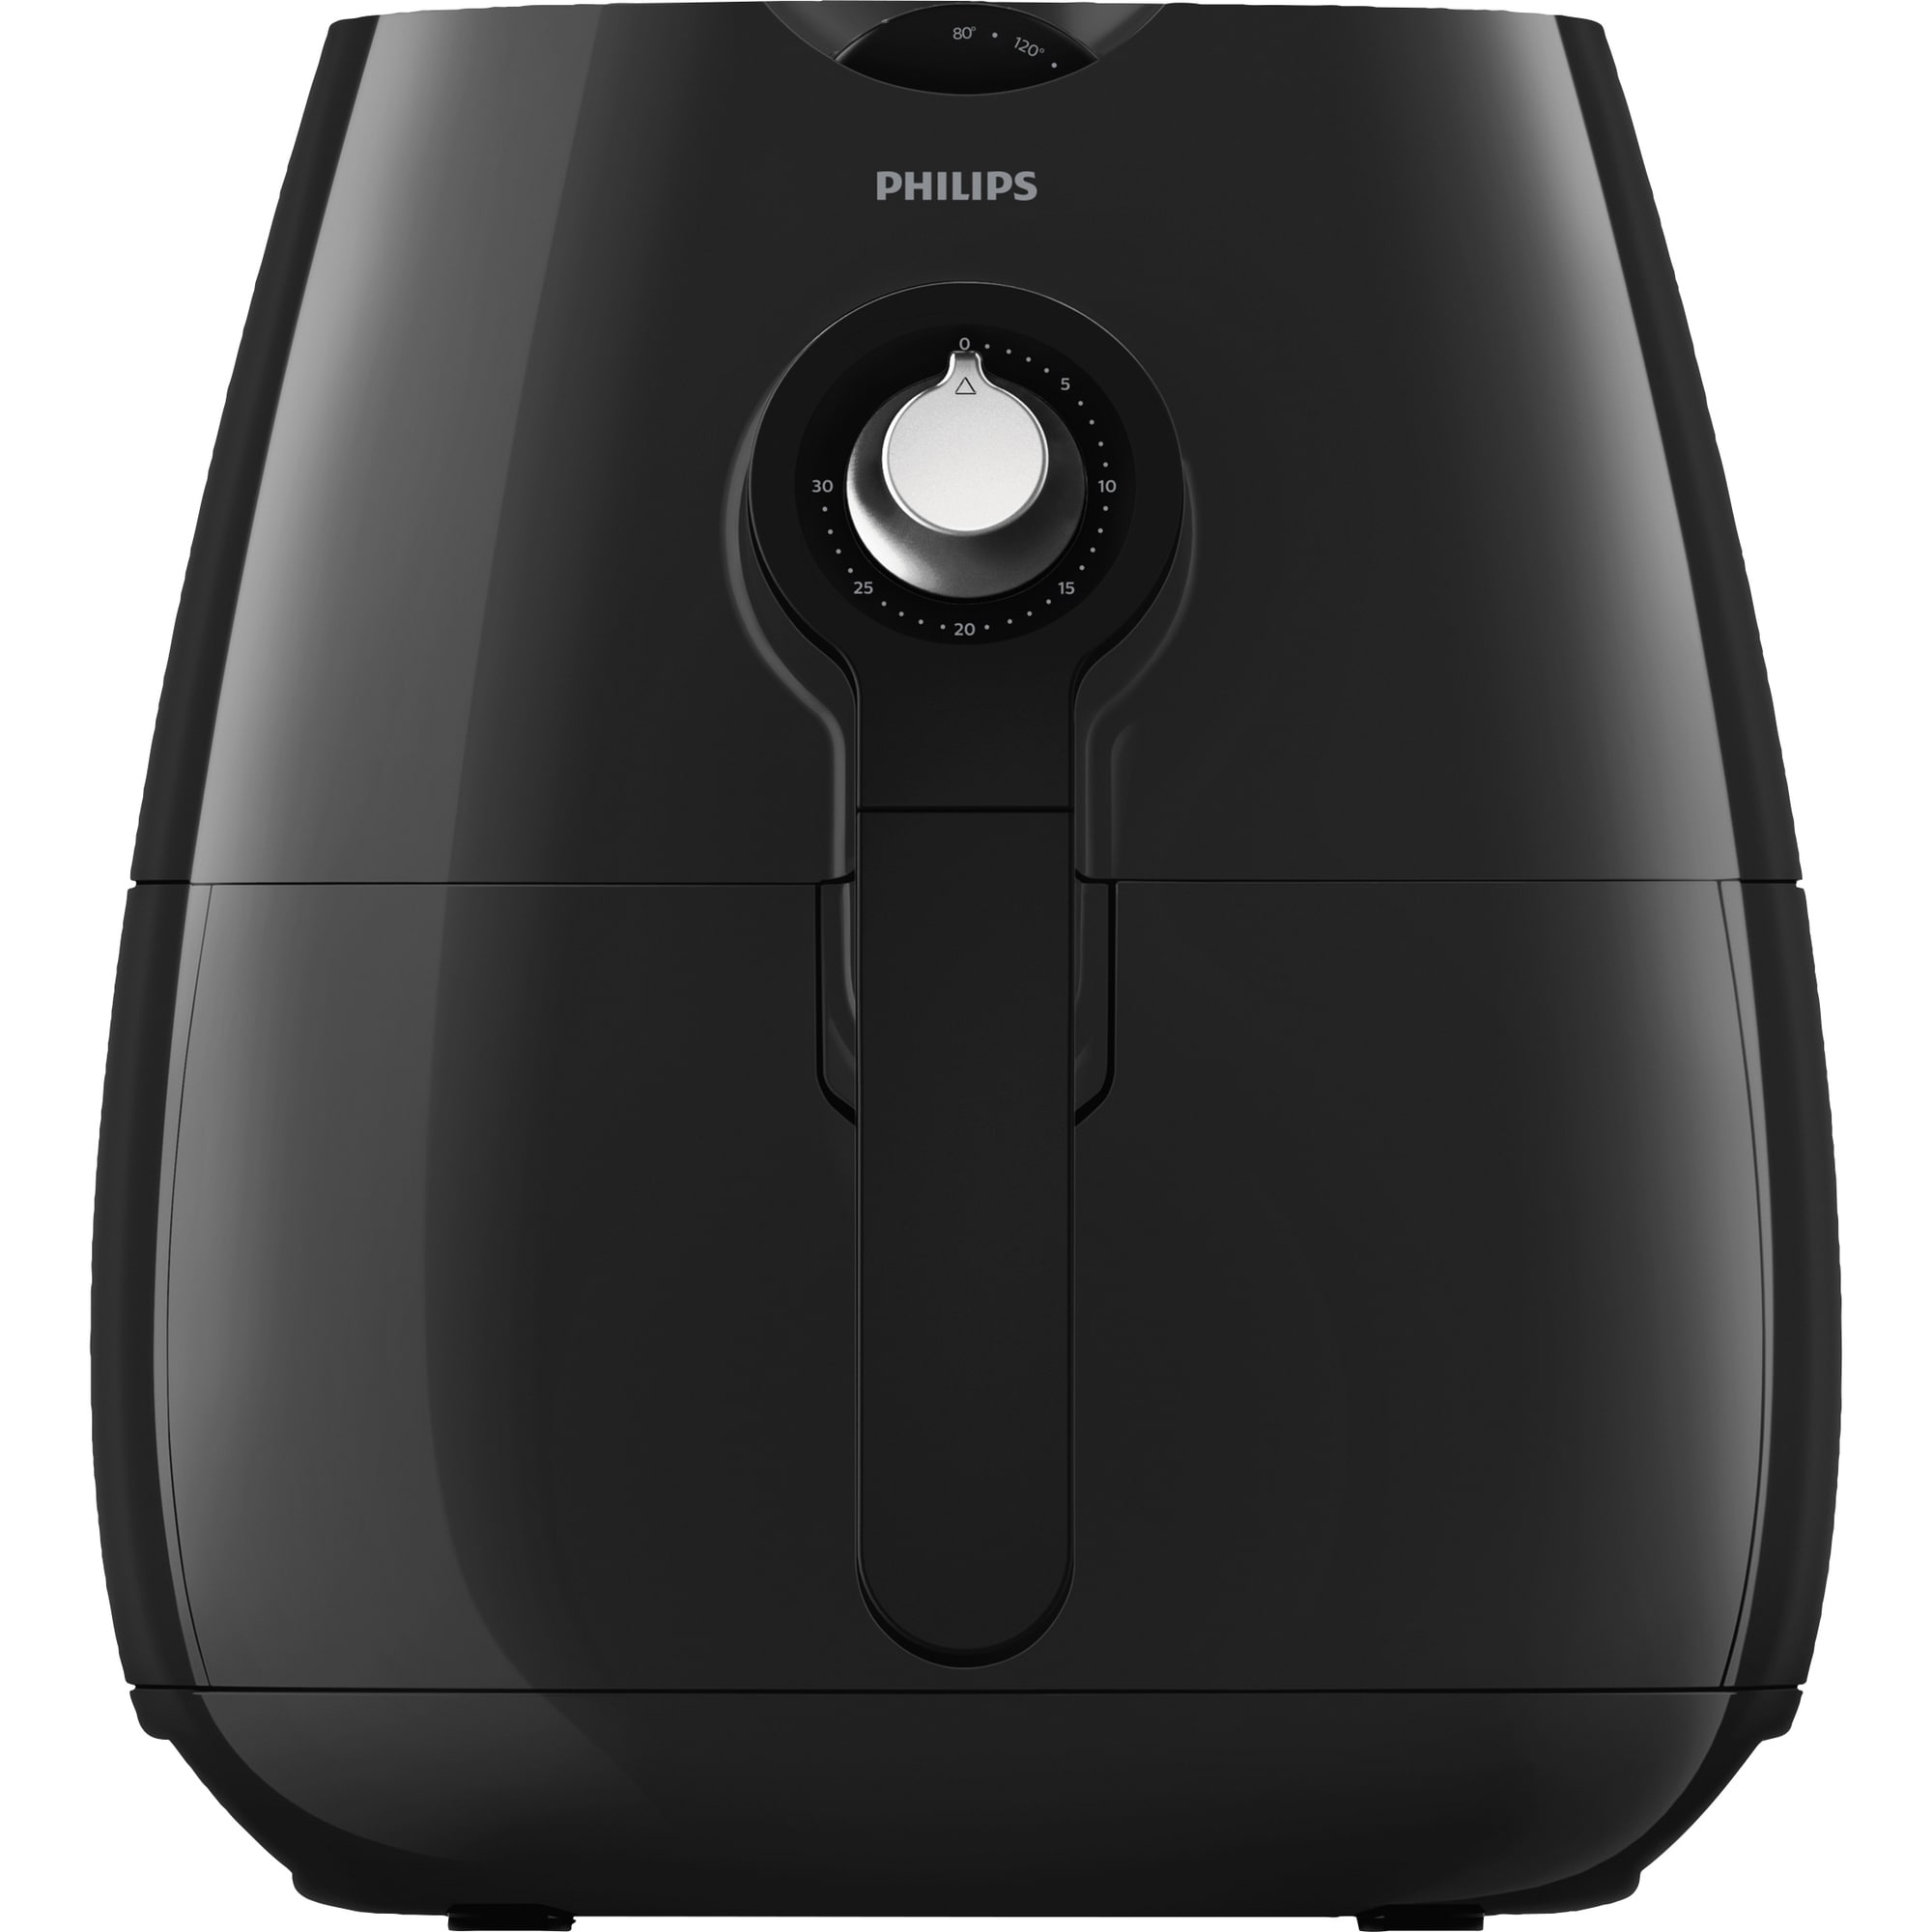 philips-daily-collection-air-fryer-hd925150.jpg